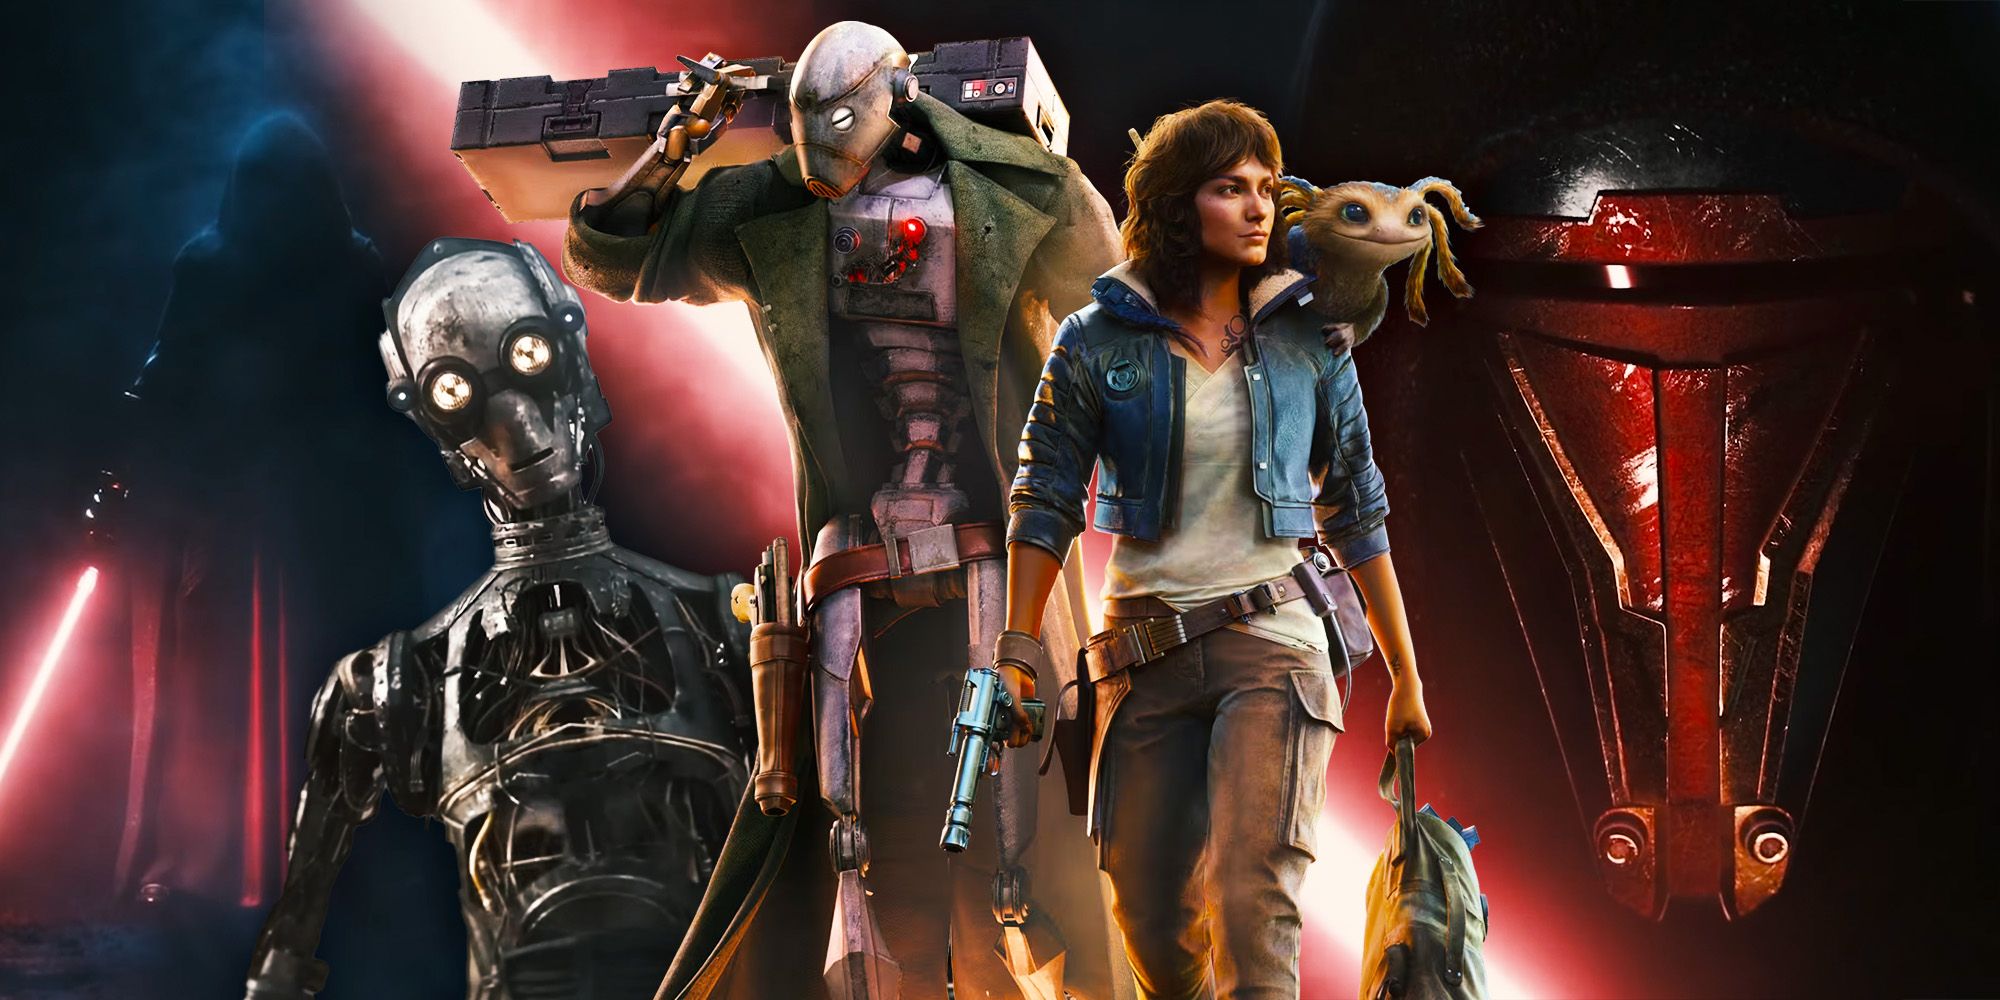 Every Upcoming Star Wars Movie That's Allegedly Coming Soon